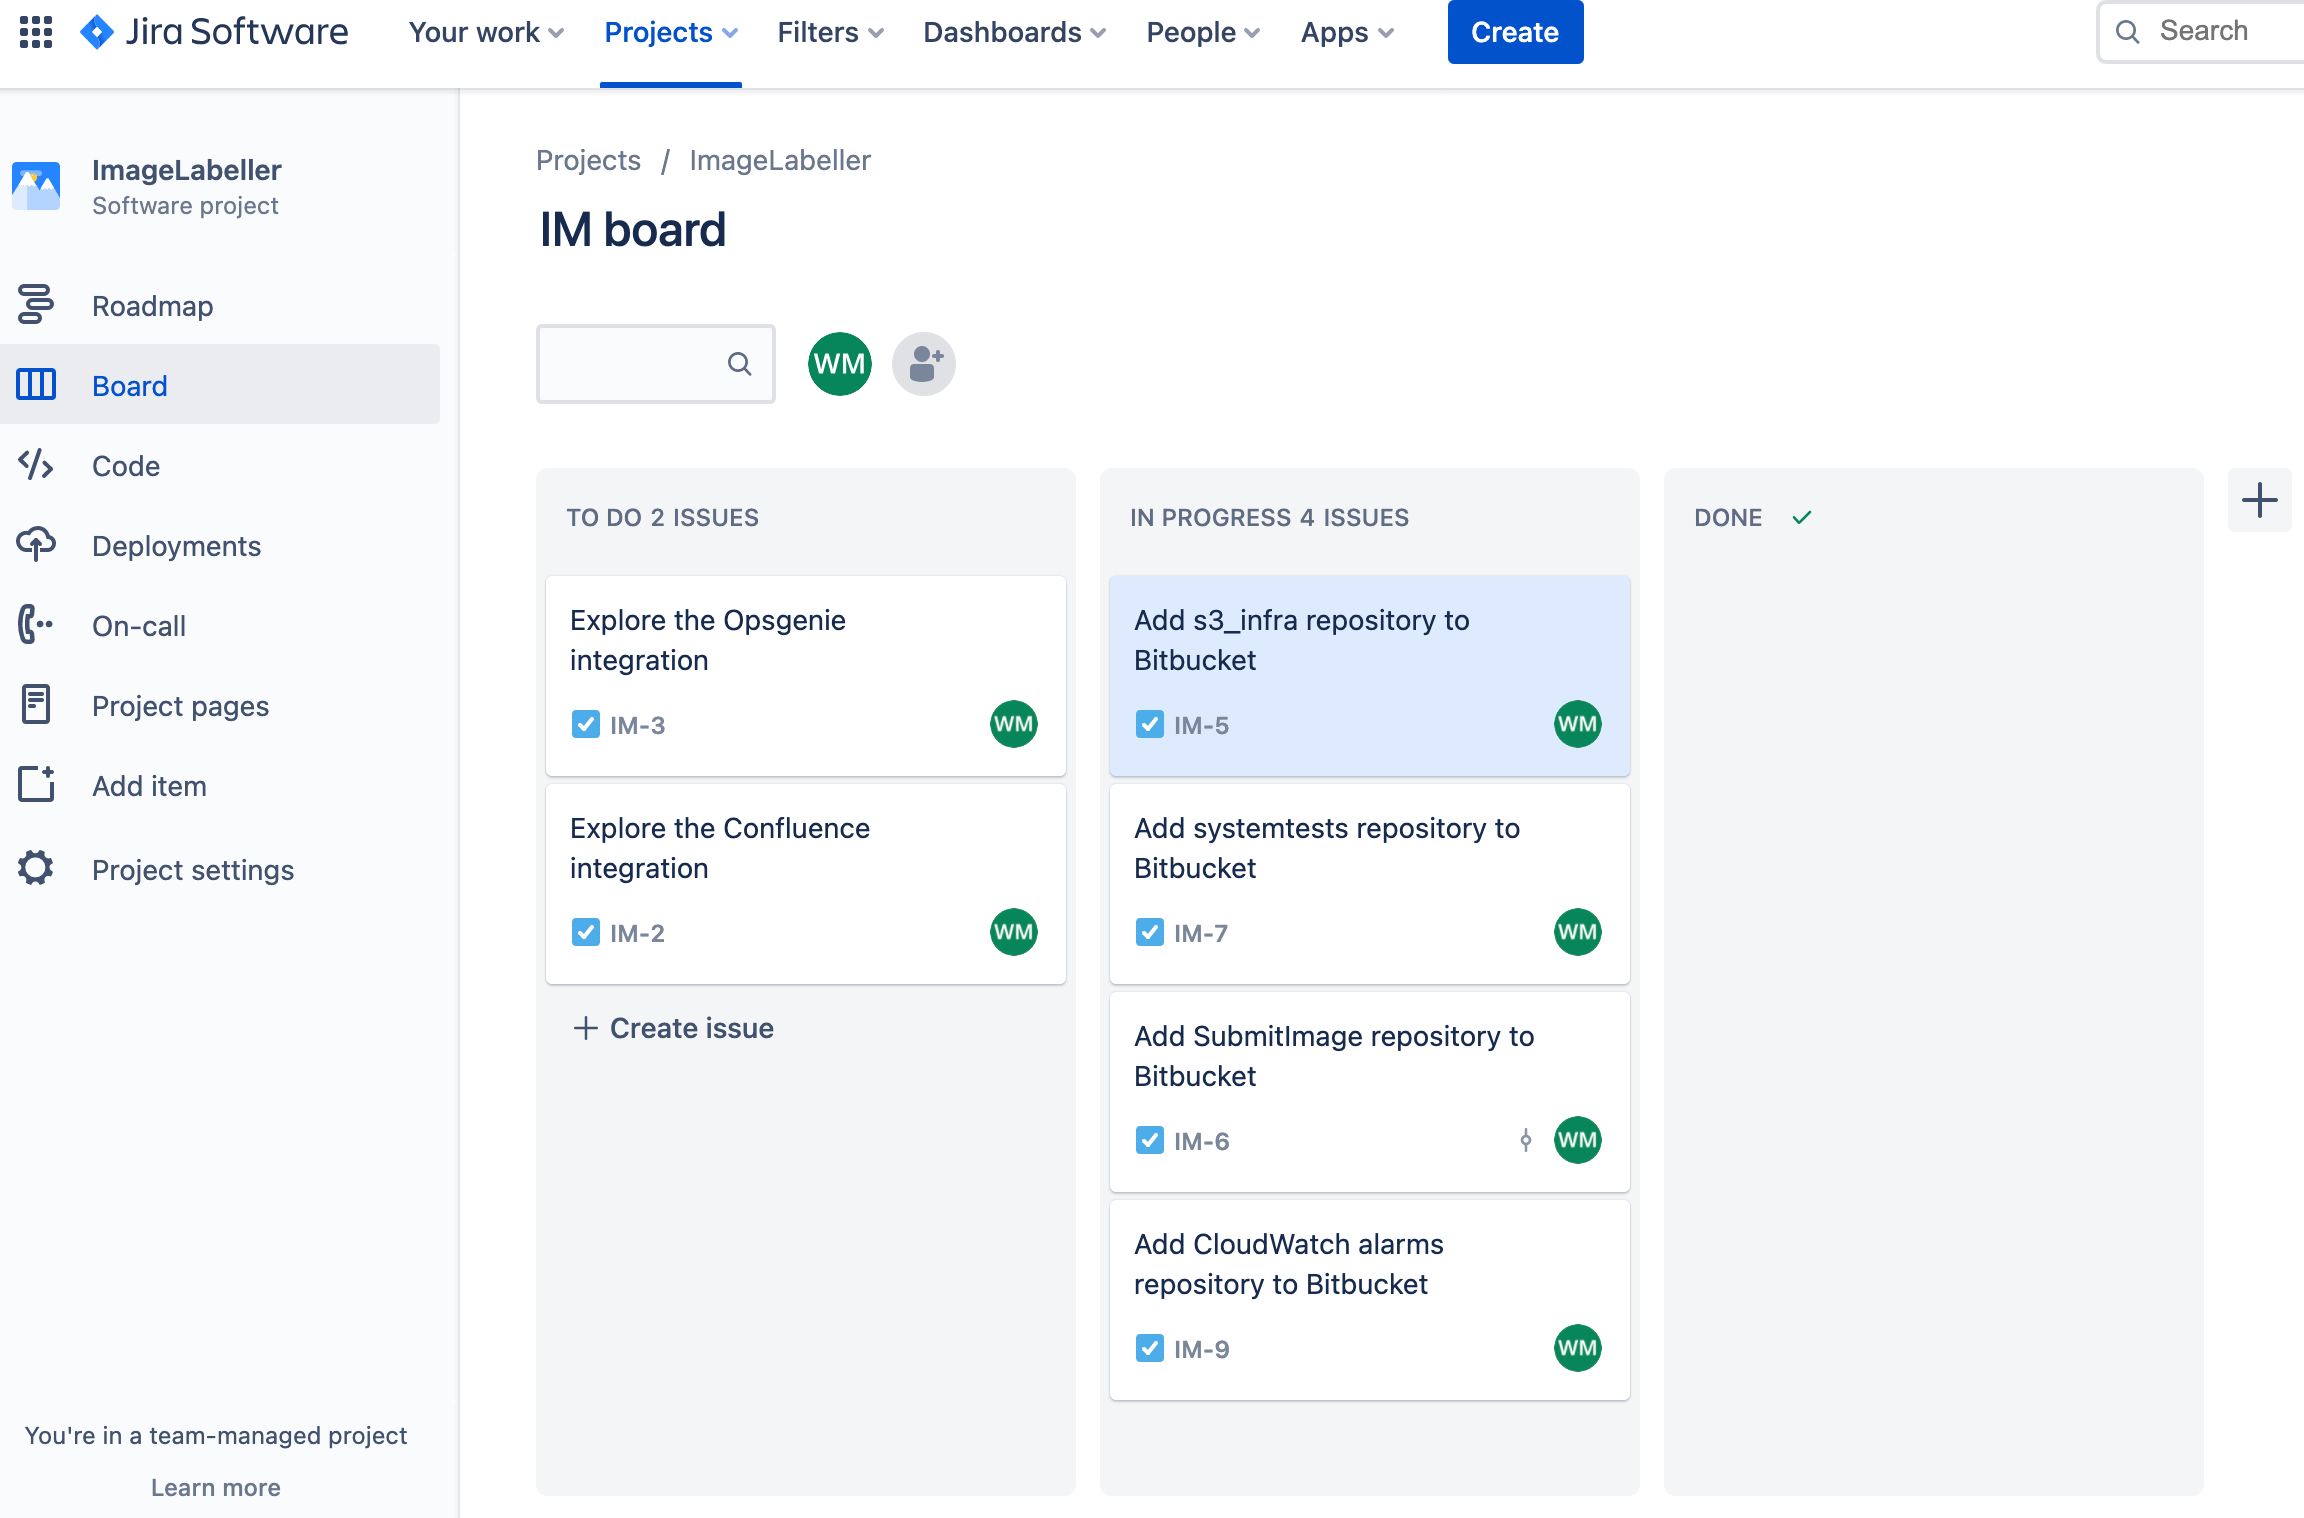 Screenshot showing Jira issue to add AWS S3 infrastructure repository to Bitbucket